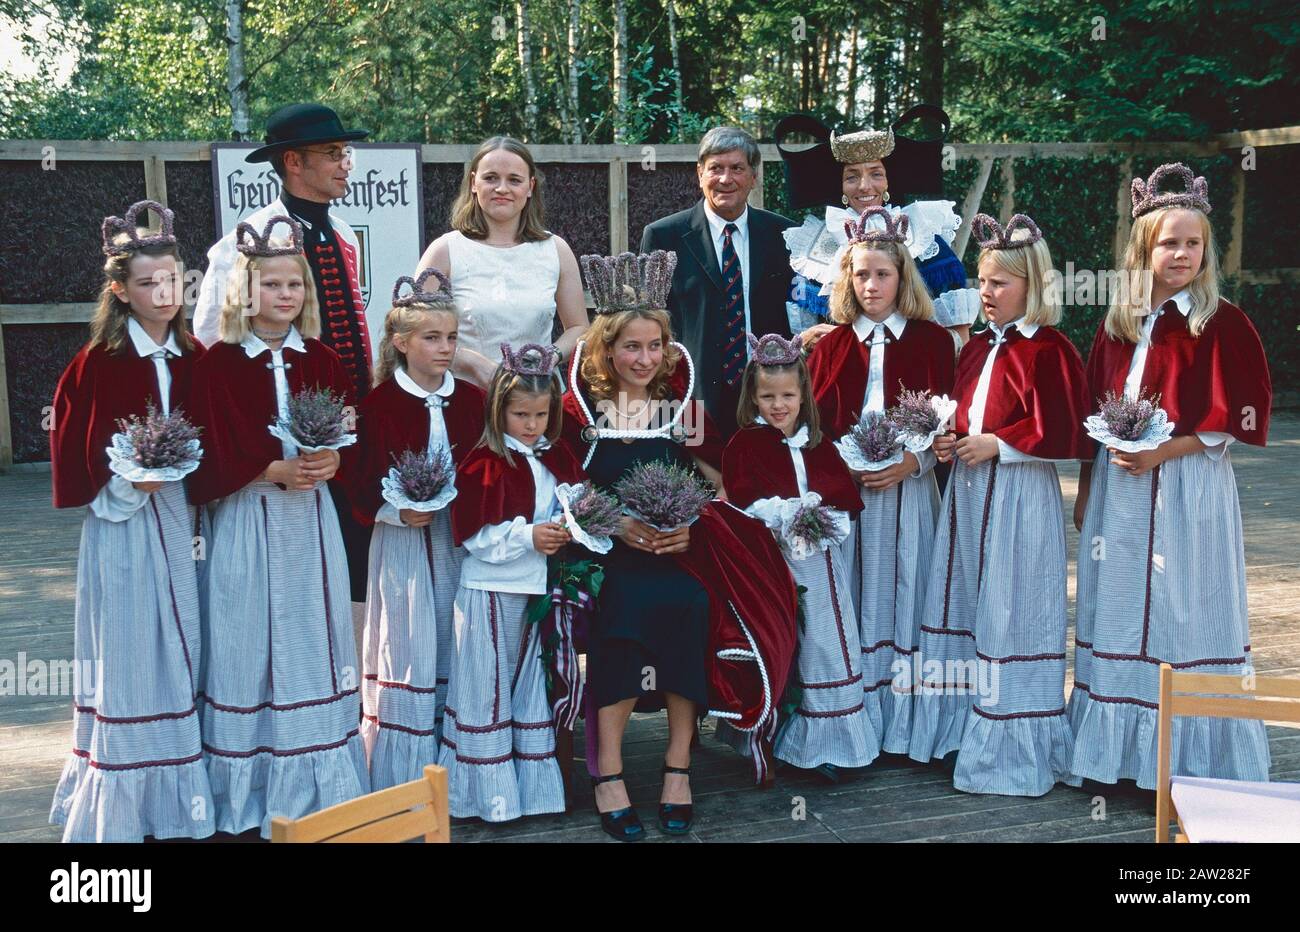 Heather Queen Annelie Richter (Witte) with Landrat Fietz and other people at Heather blooming festival in Amelinghausen 2001, Lower Saxony, Germany Stock Photo